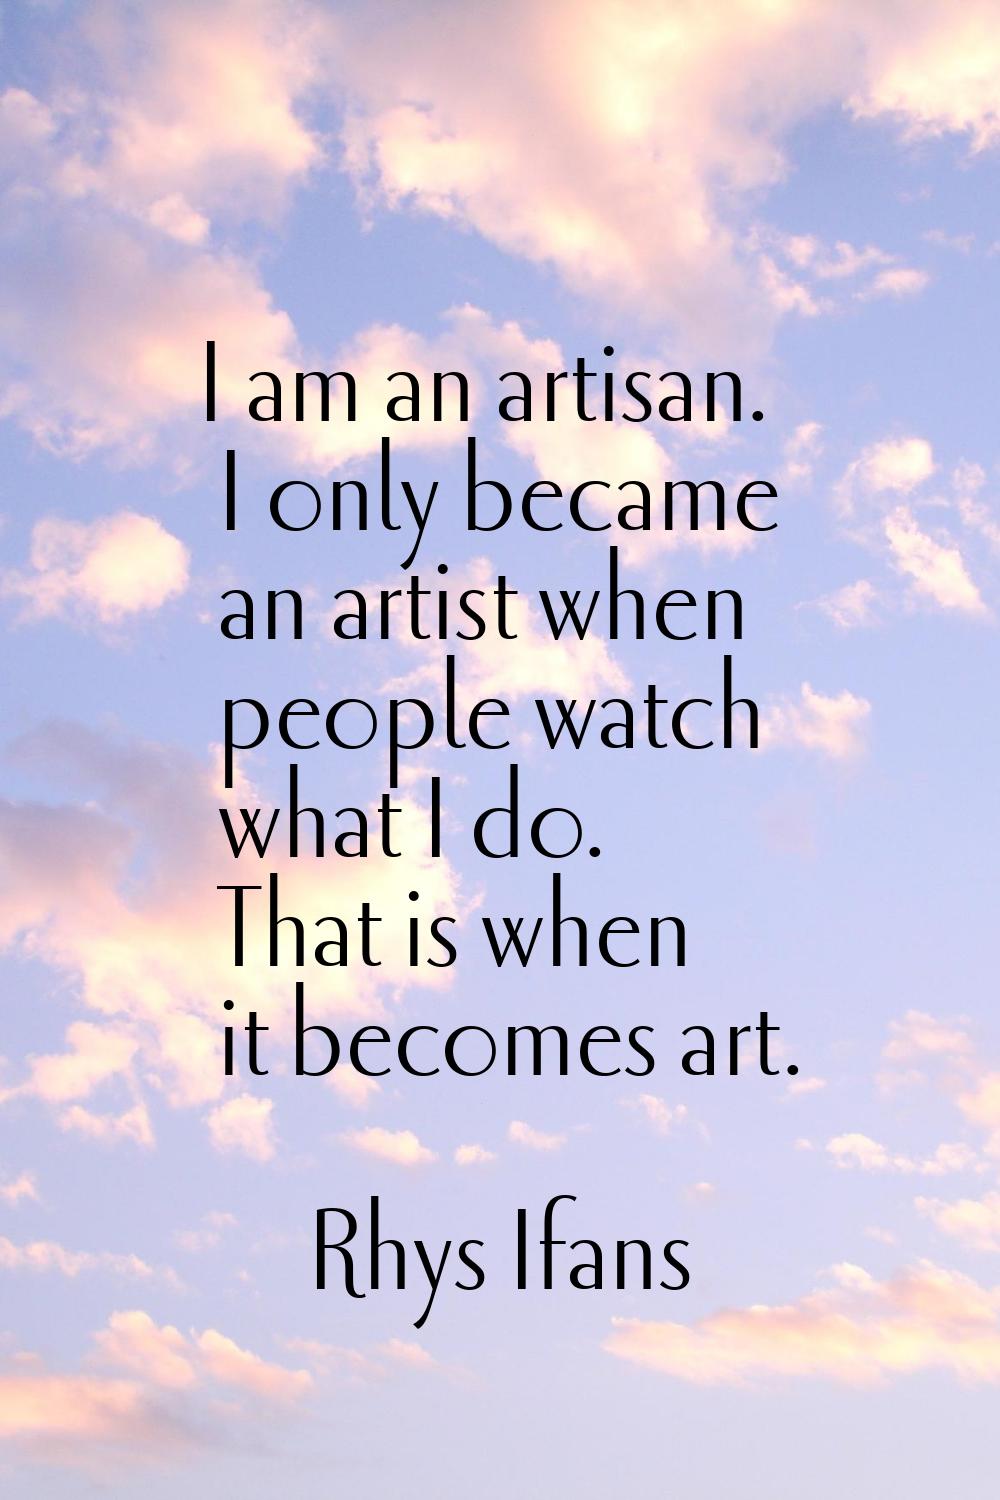 I am an artisan. I only became an artist when people watch what I do. That is when it becomes art.